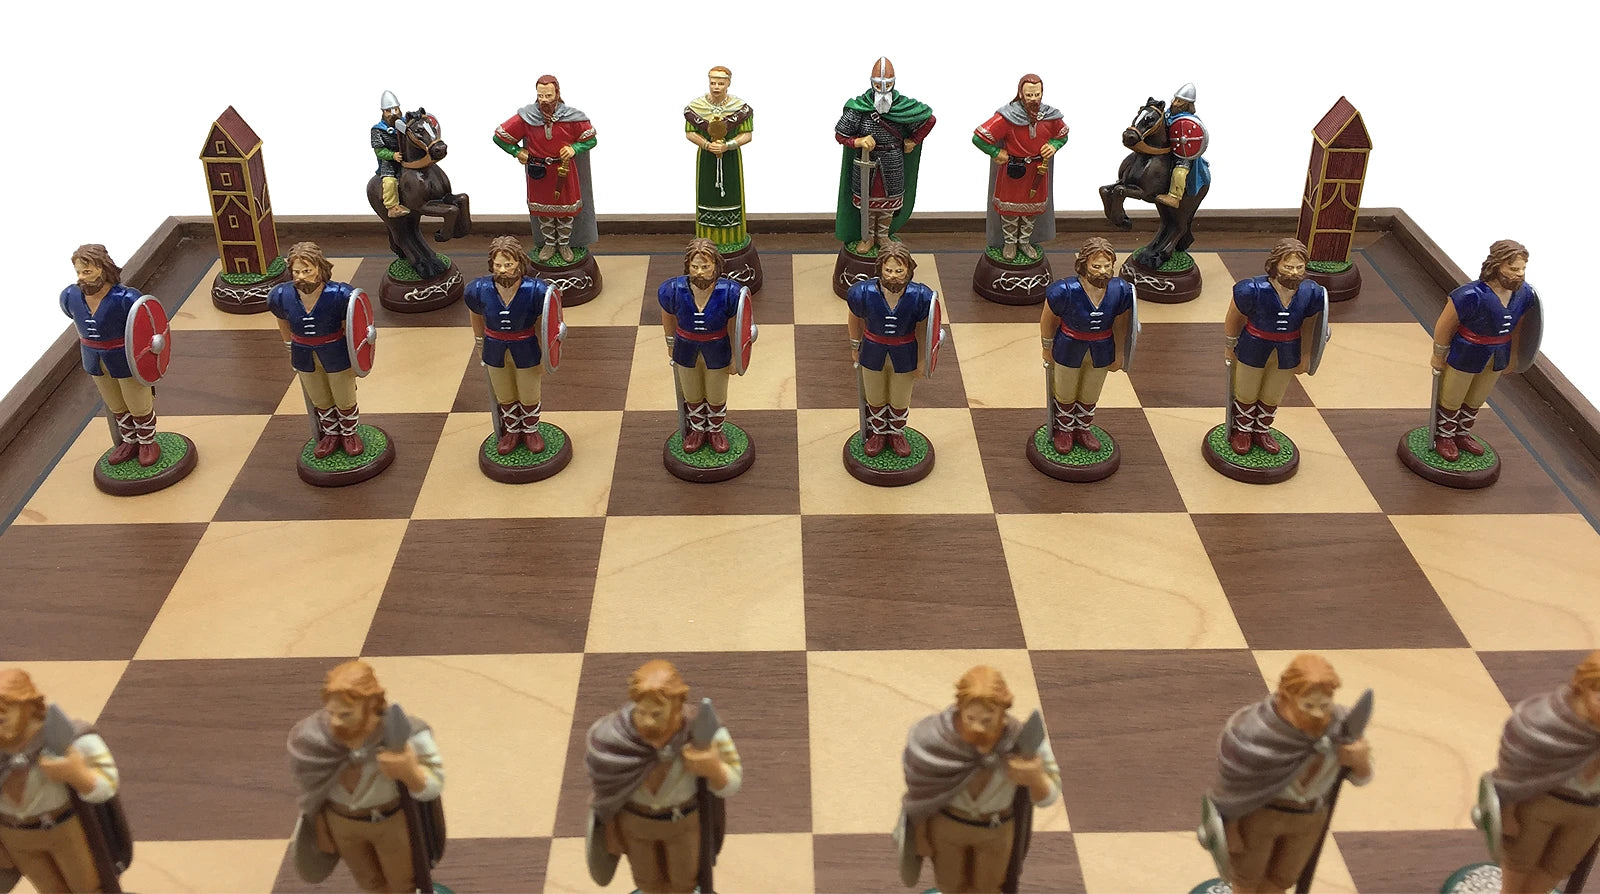 Toy soldier miniature army men Battle of Clontarf Chess Set.